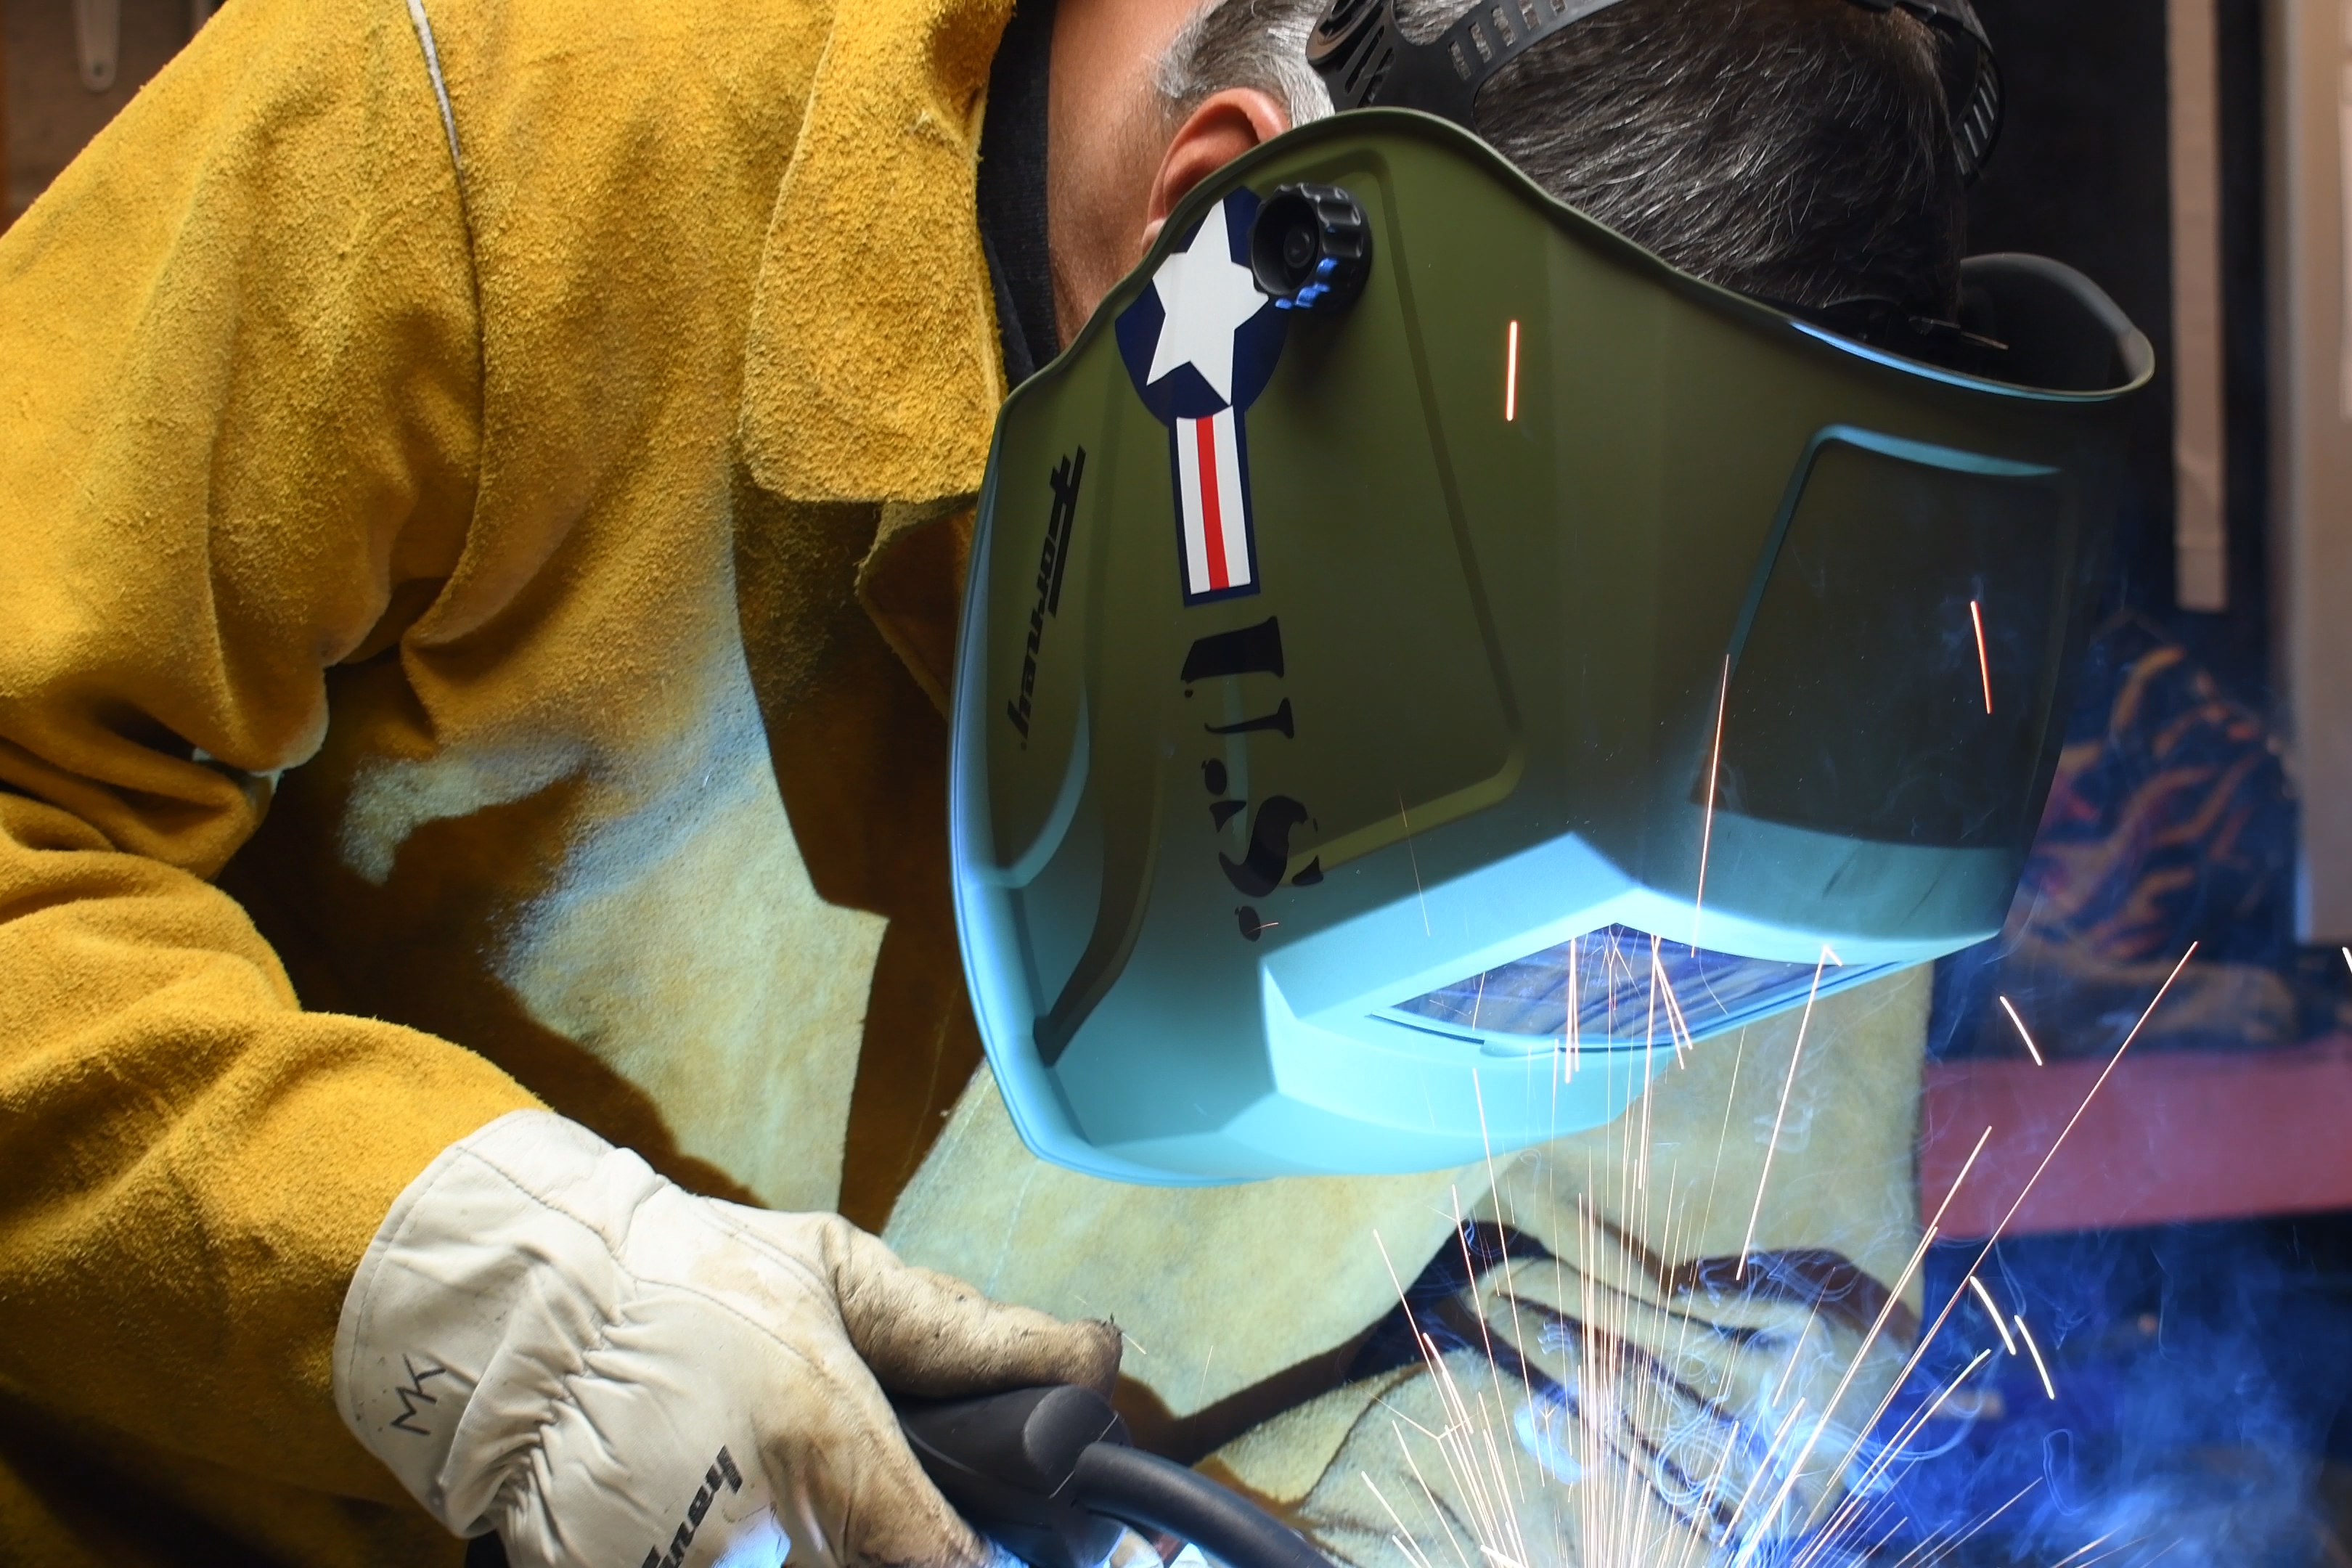 How To Select The Right Welding Helmet